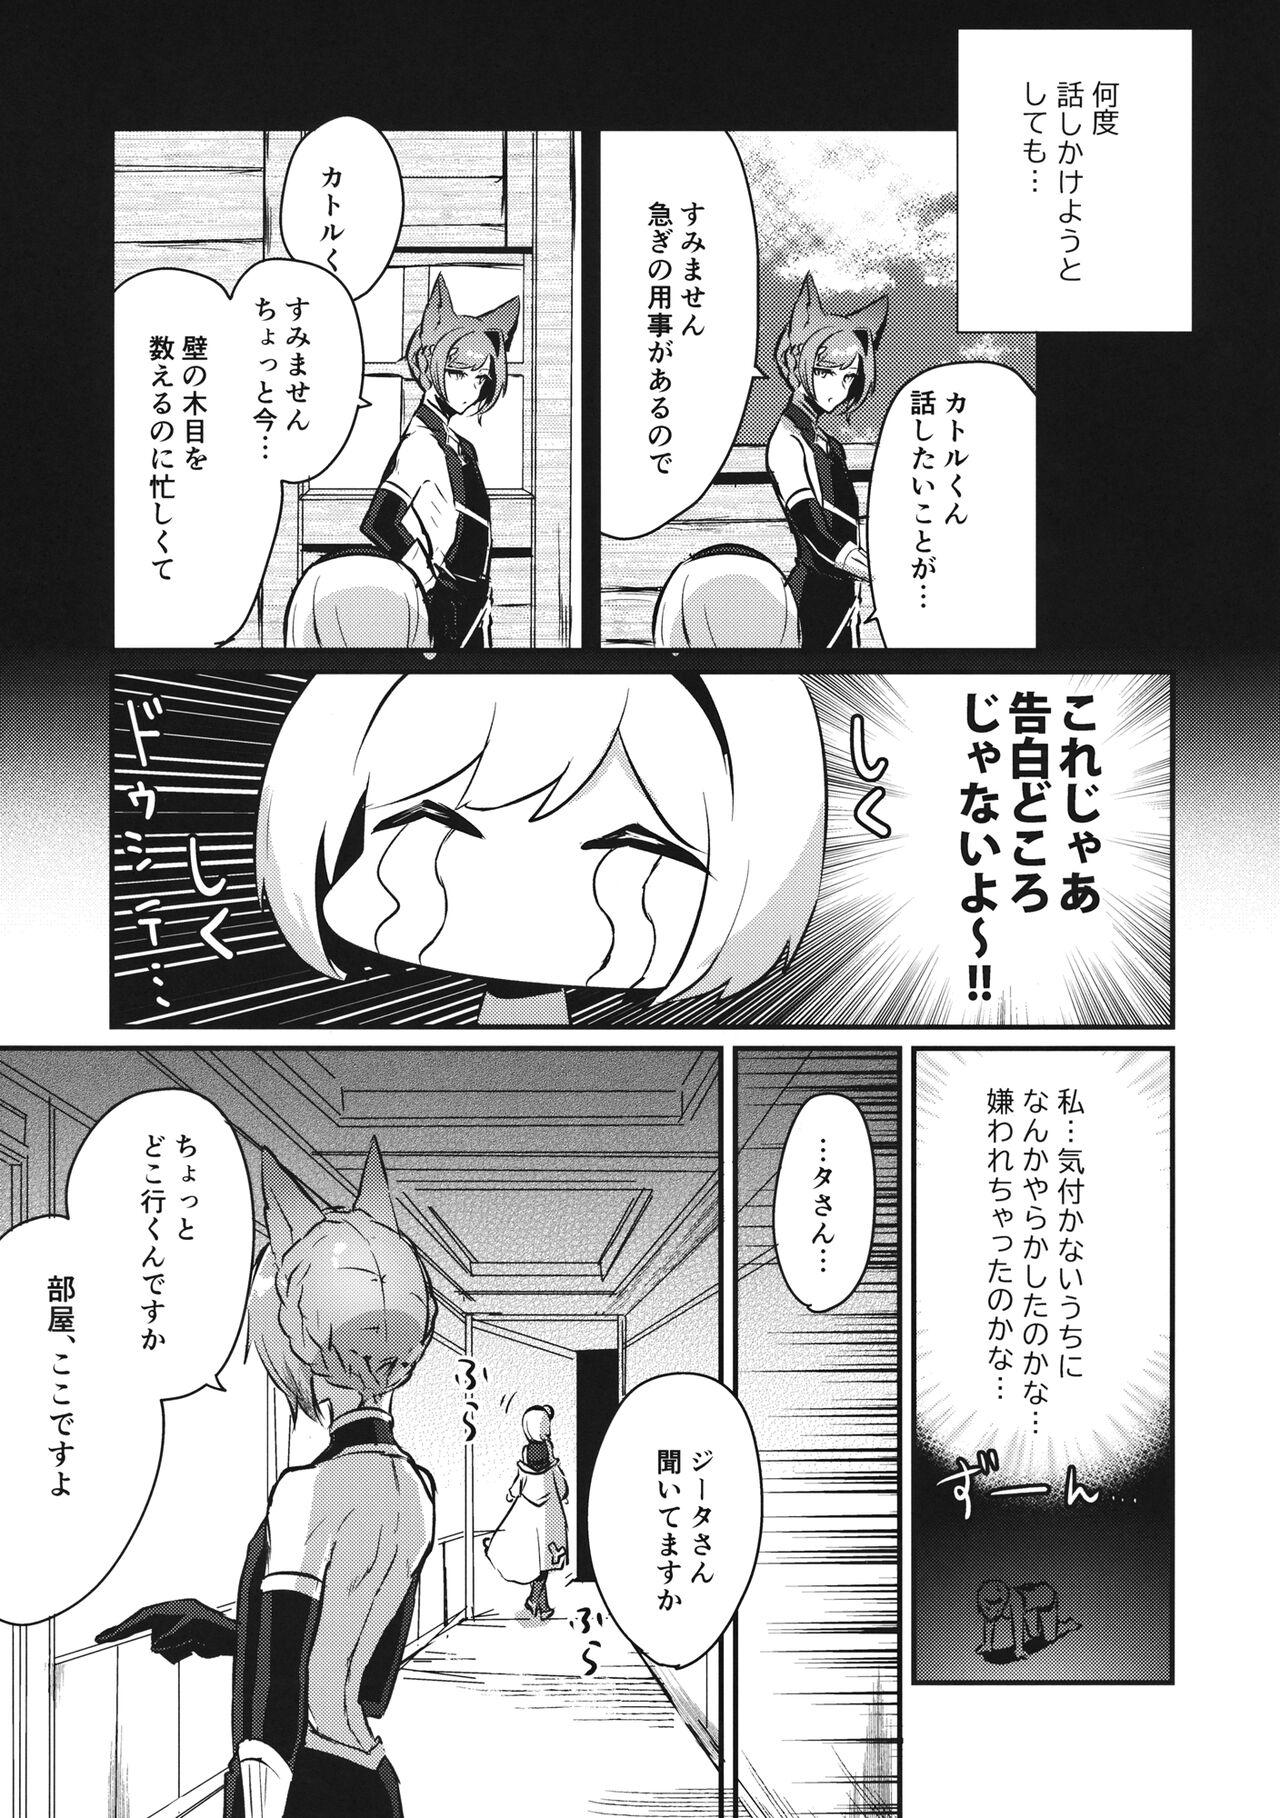 Foreplay Sugar pot Syndrome - Granblue fantasy Foreskin - Page 8